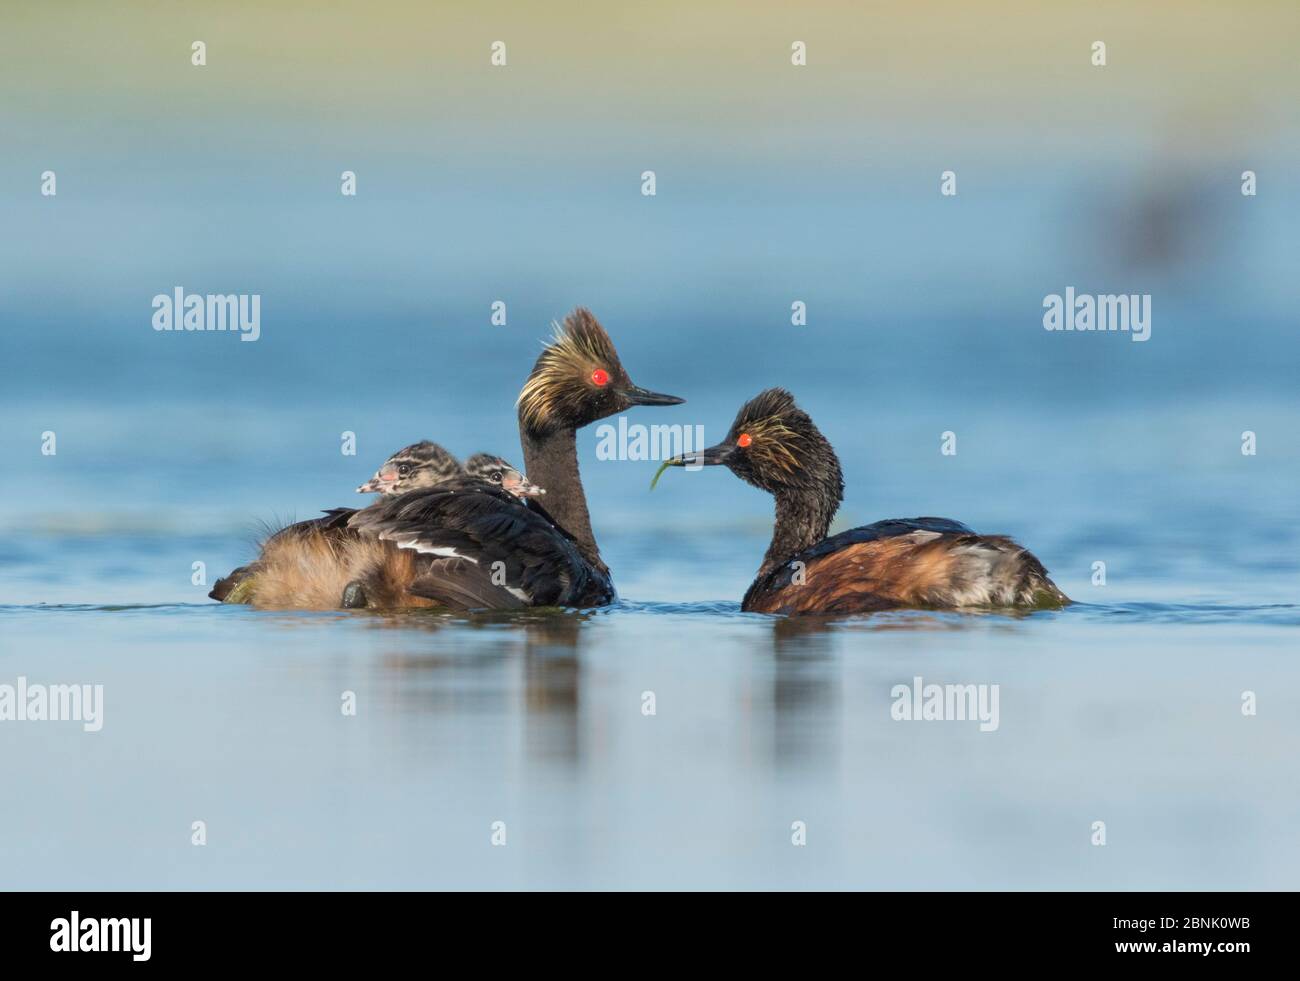 Eared grebes (Podiceps nigricollis), pair, one adult carrying food (damselfly) for two chicks riding on the other adult's back, Bowdoin National Wildl Stock Photo